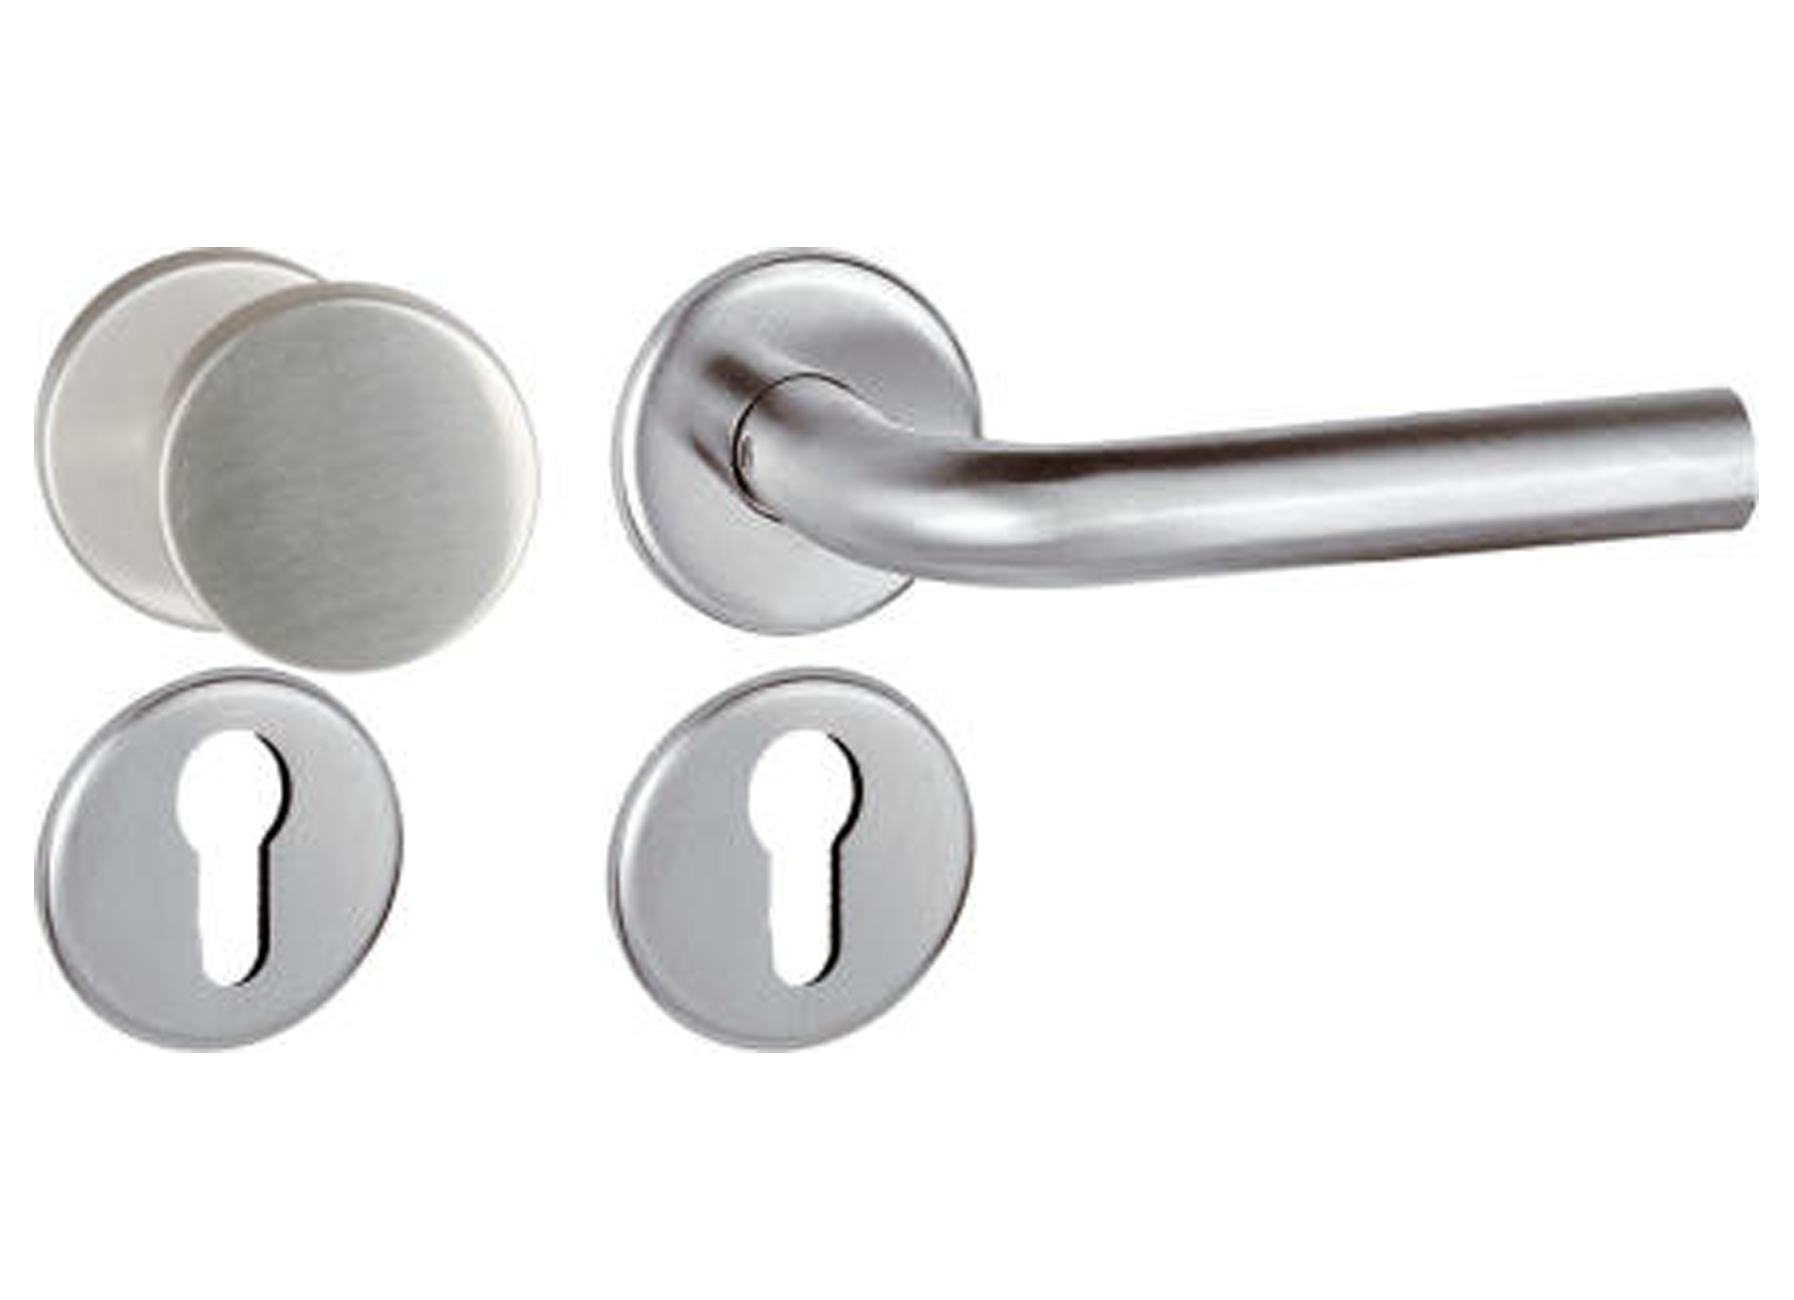 BOUTON DE PORTE FIXE + DEMI BEQUILLE + ROSACE + ENTREE CYLINDRE INOX